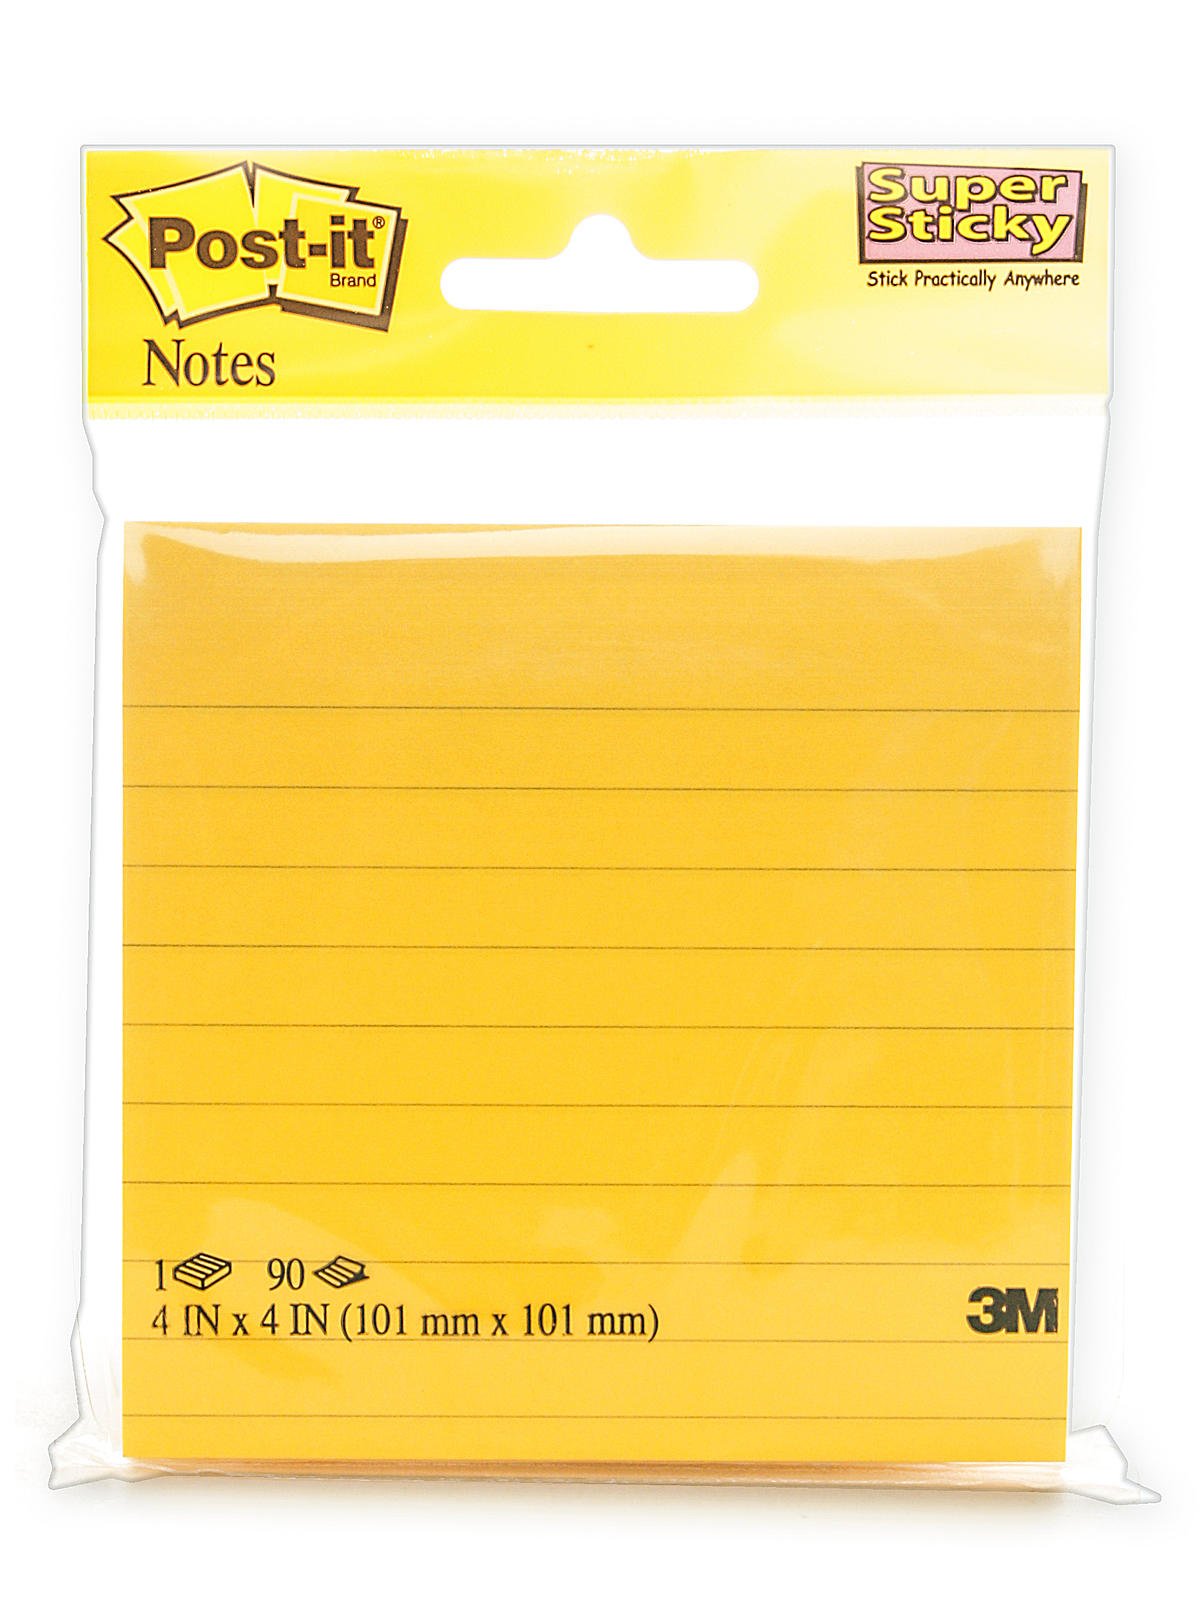 Post-it Super Sticky Notes 4490-SSMX, 4 in x 4 in (101 mm x 101 mm) Marrakesh/Rio de Janeiro Collection, 1 pad/pack, 90 sheets/pad